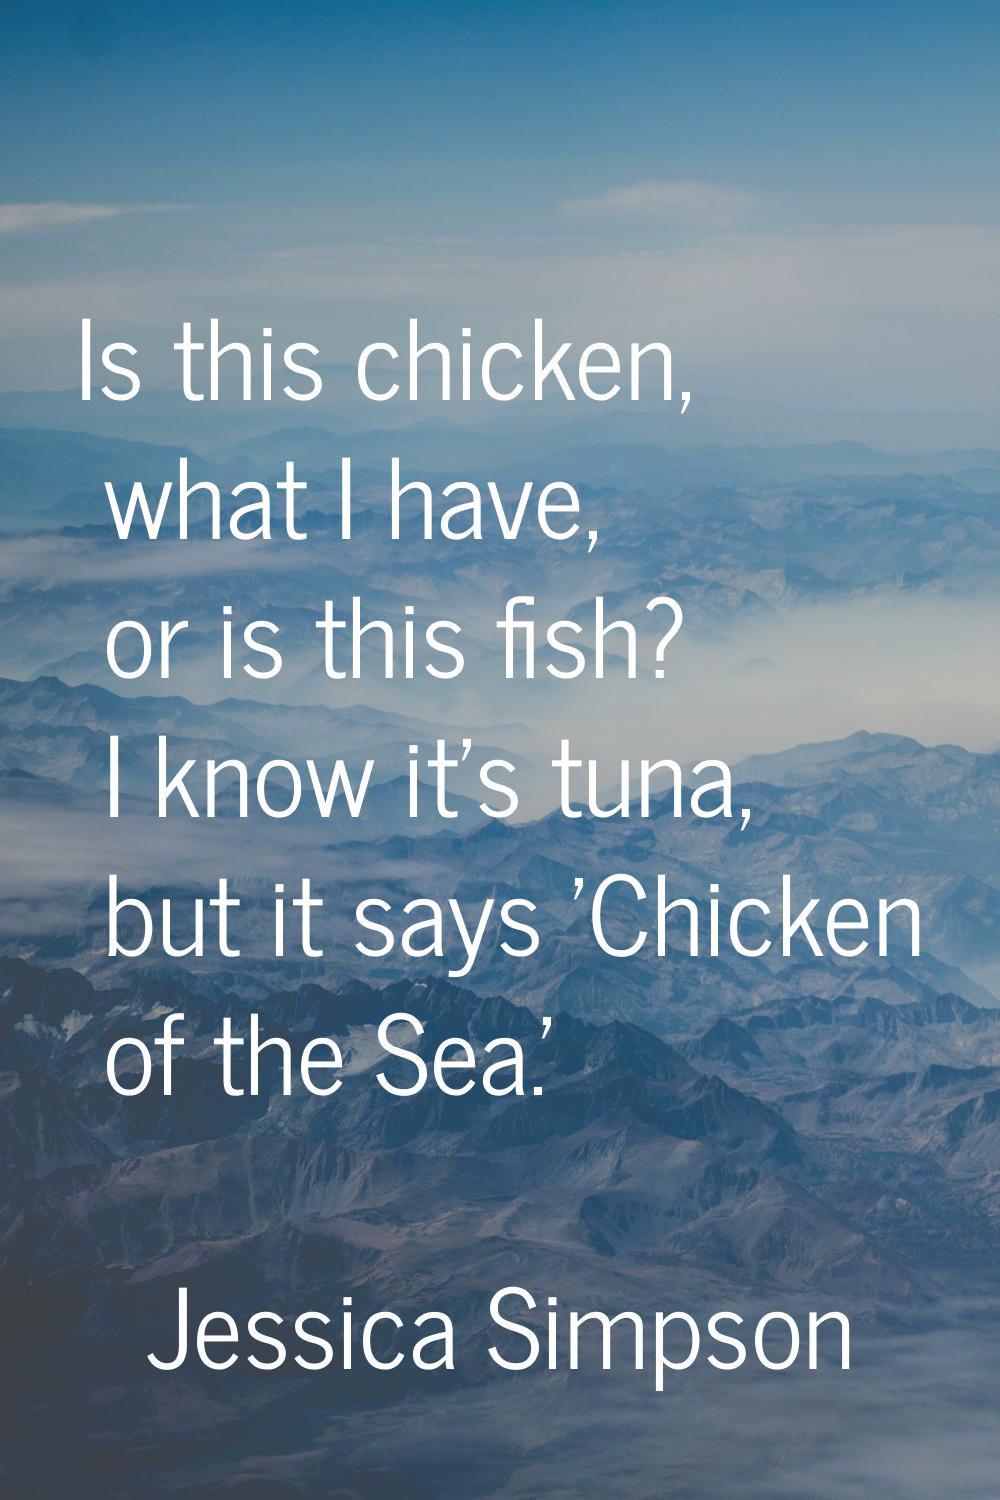 Is this chicken, what I have, or is this fish? I know it's tuna, but it says 'Chicken of the Sea.'